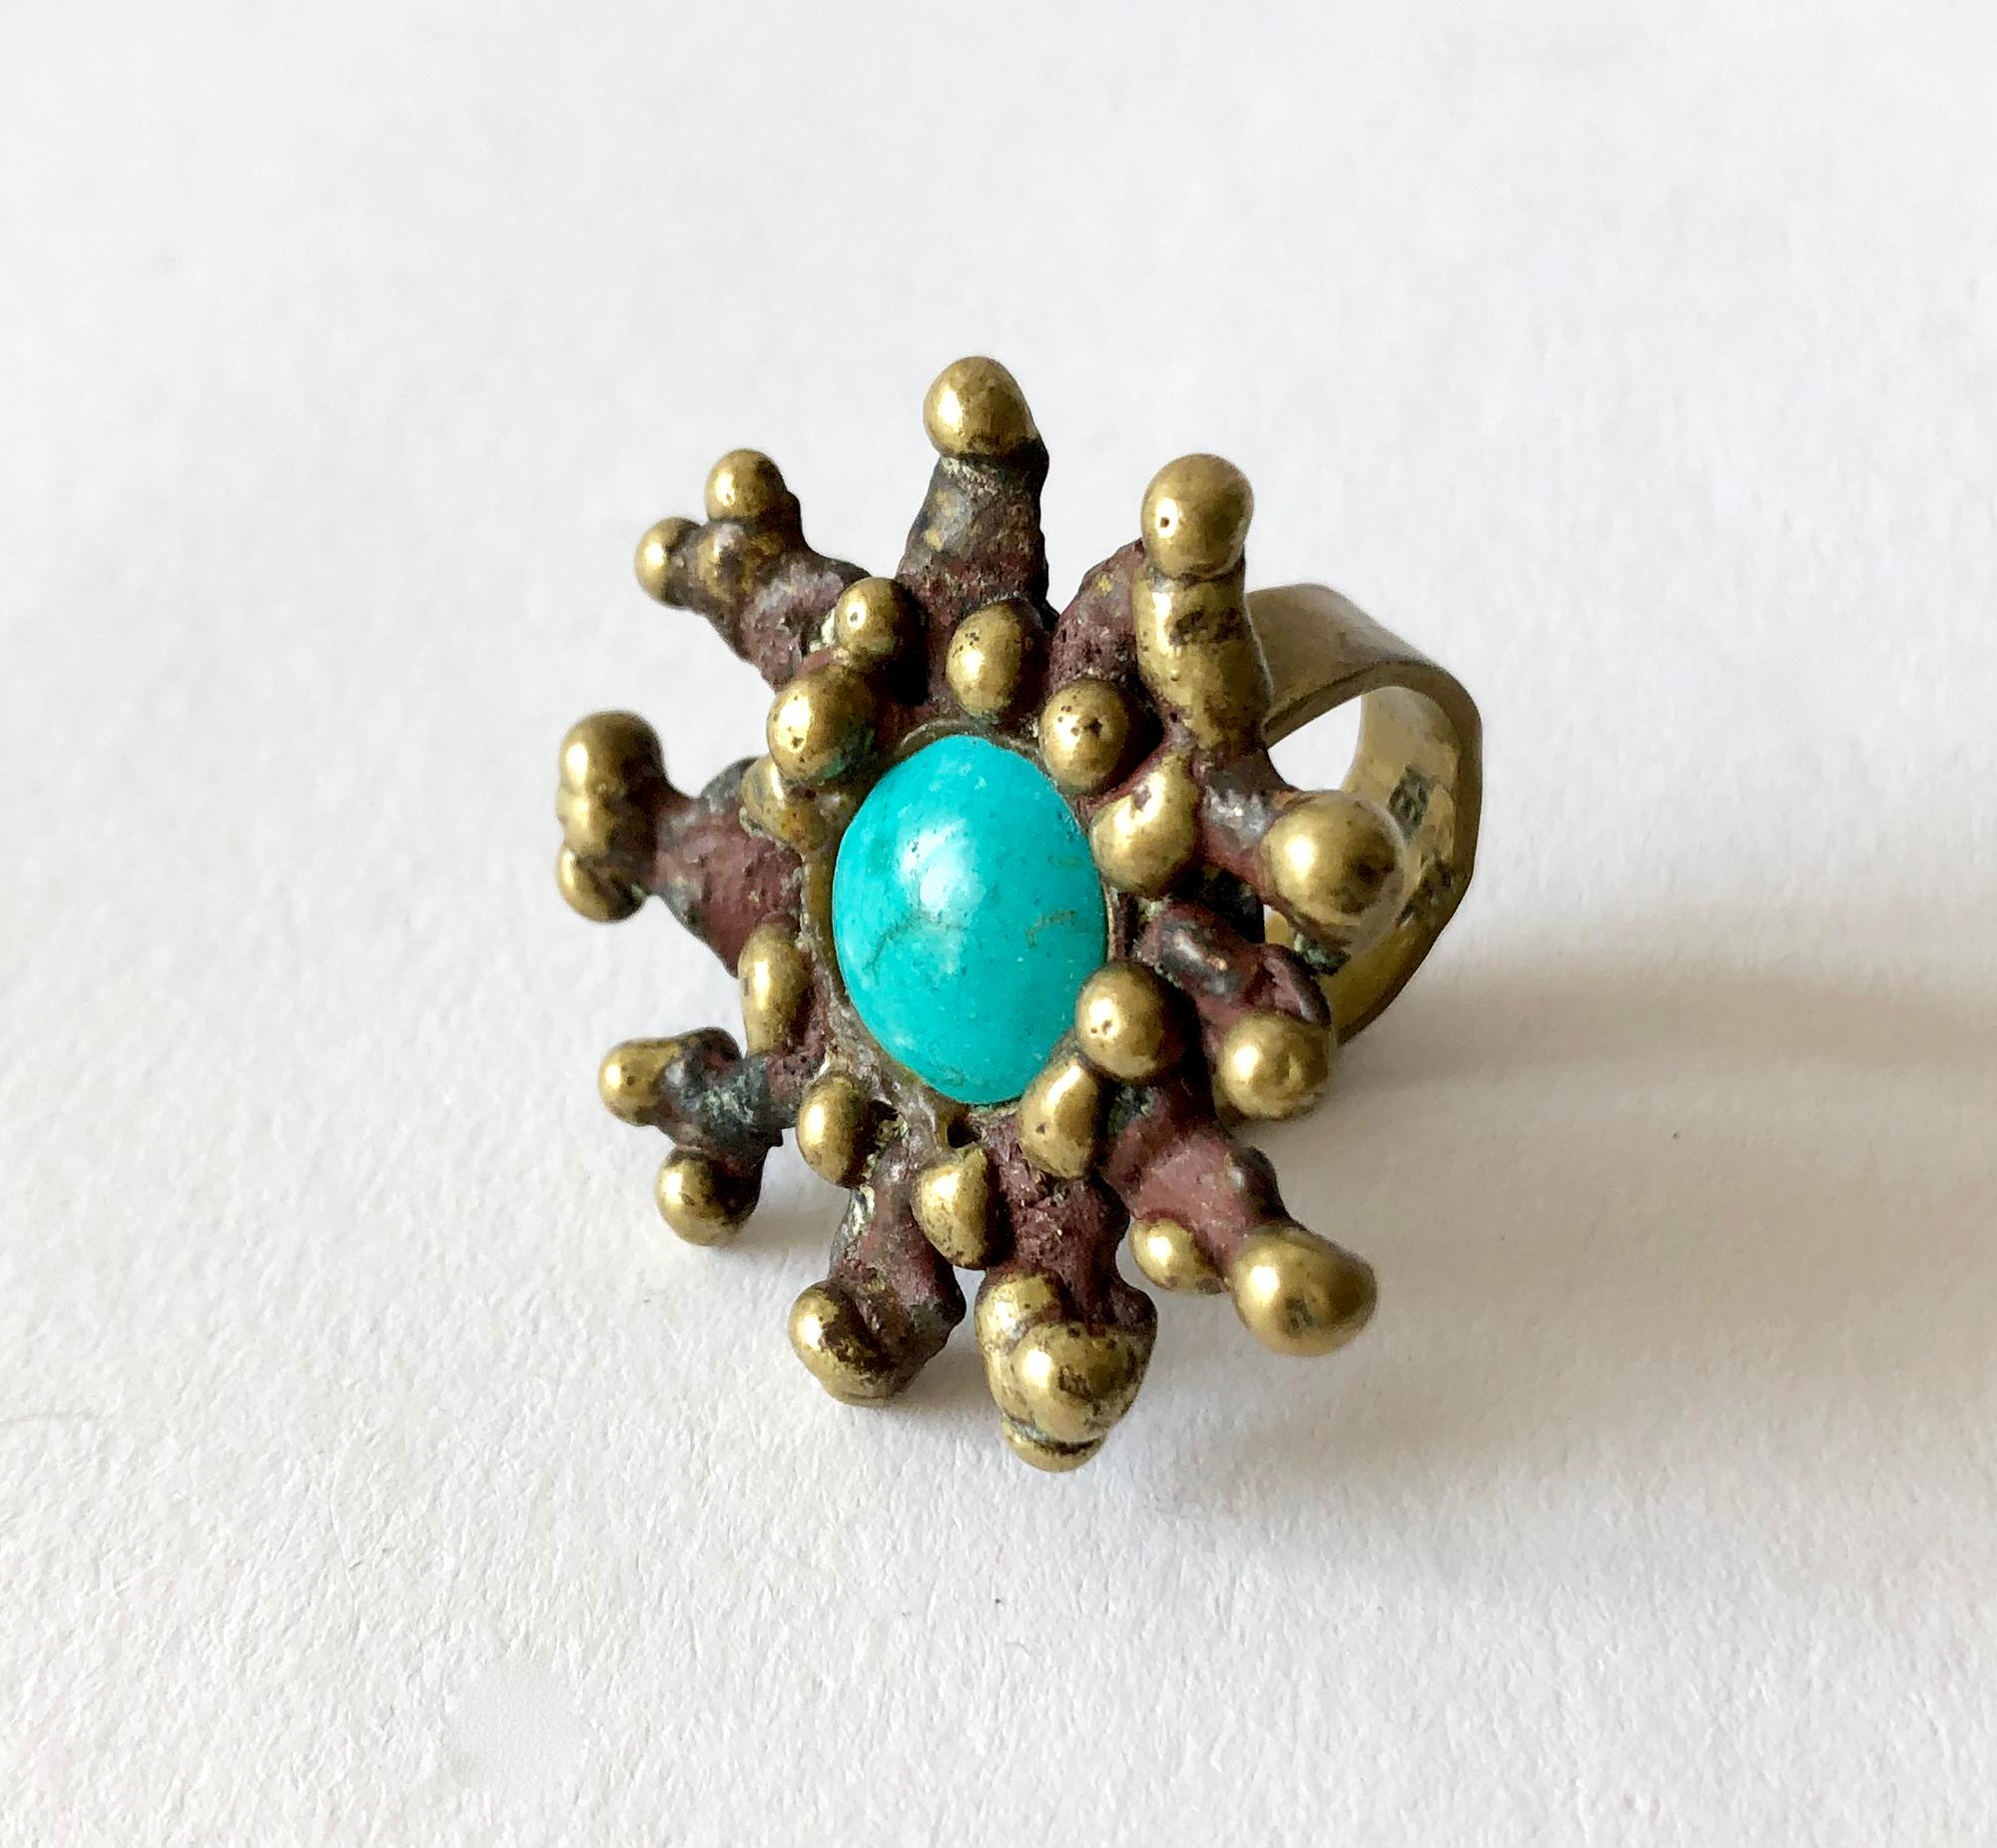 Pal Kepenyes bronze ring set with a turquoise stone, circa 1970's.  Ring is a finger size 5 and is signed Pal Kepenyes on the shank.  In very good vintage condition.  